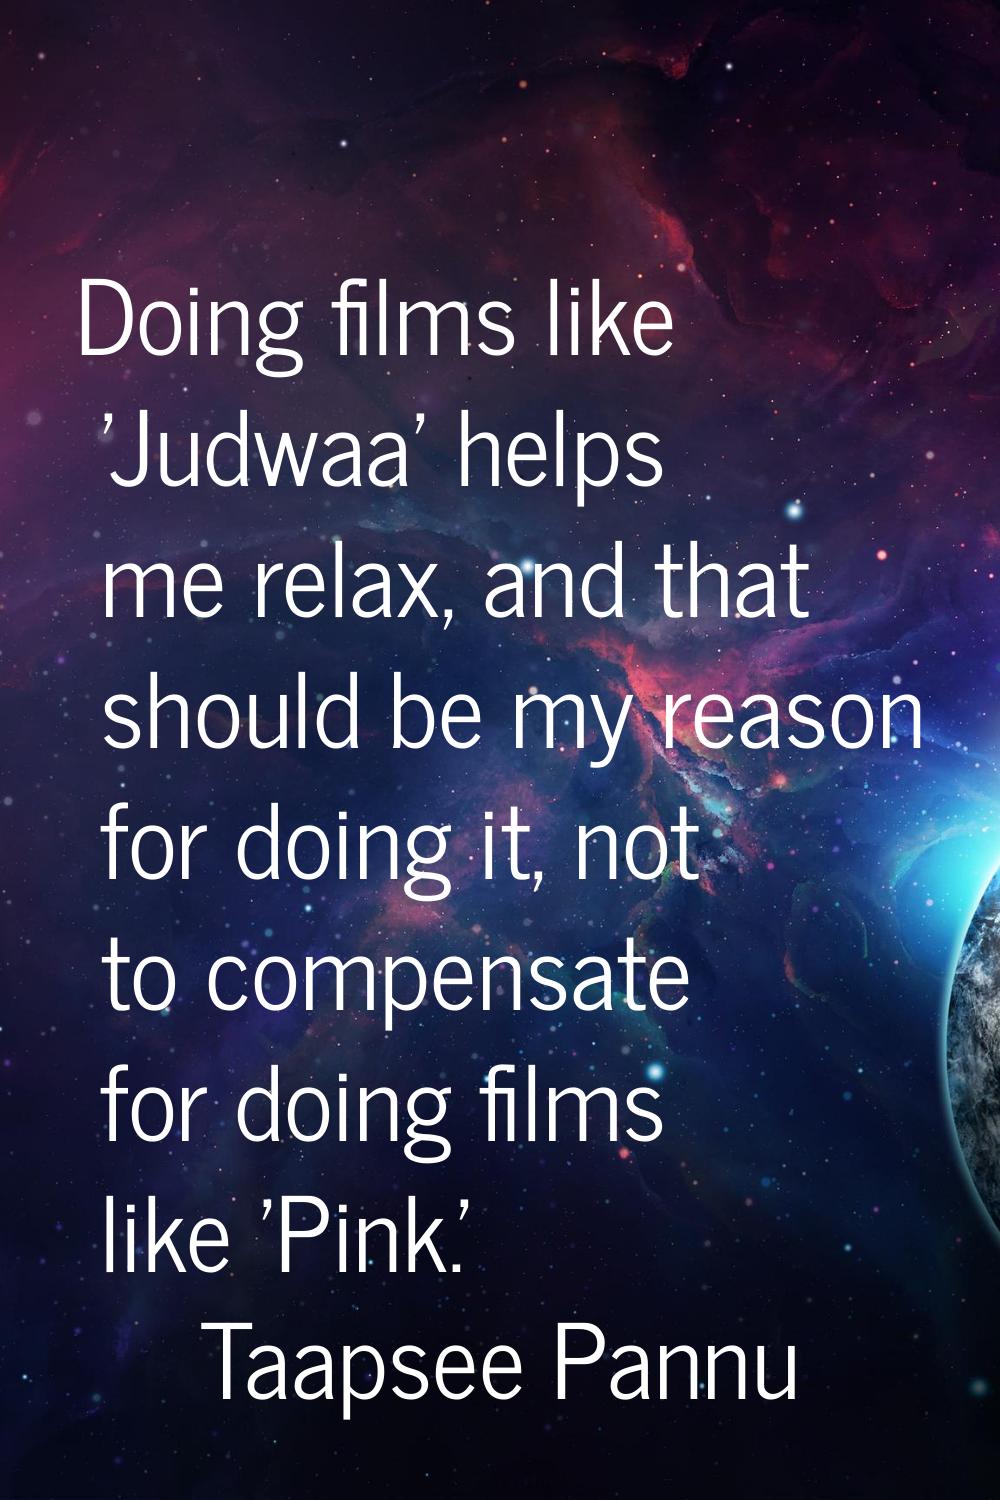 Doing films like 'Judwaa' helps me relax, and that should be my reason for doing it, not to compens